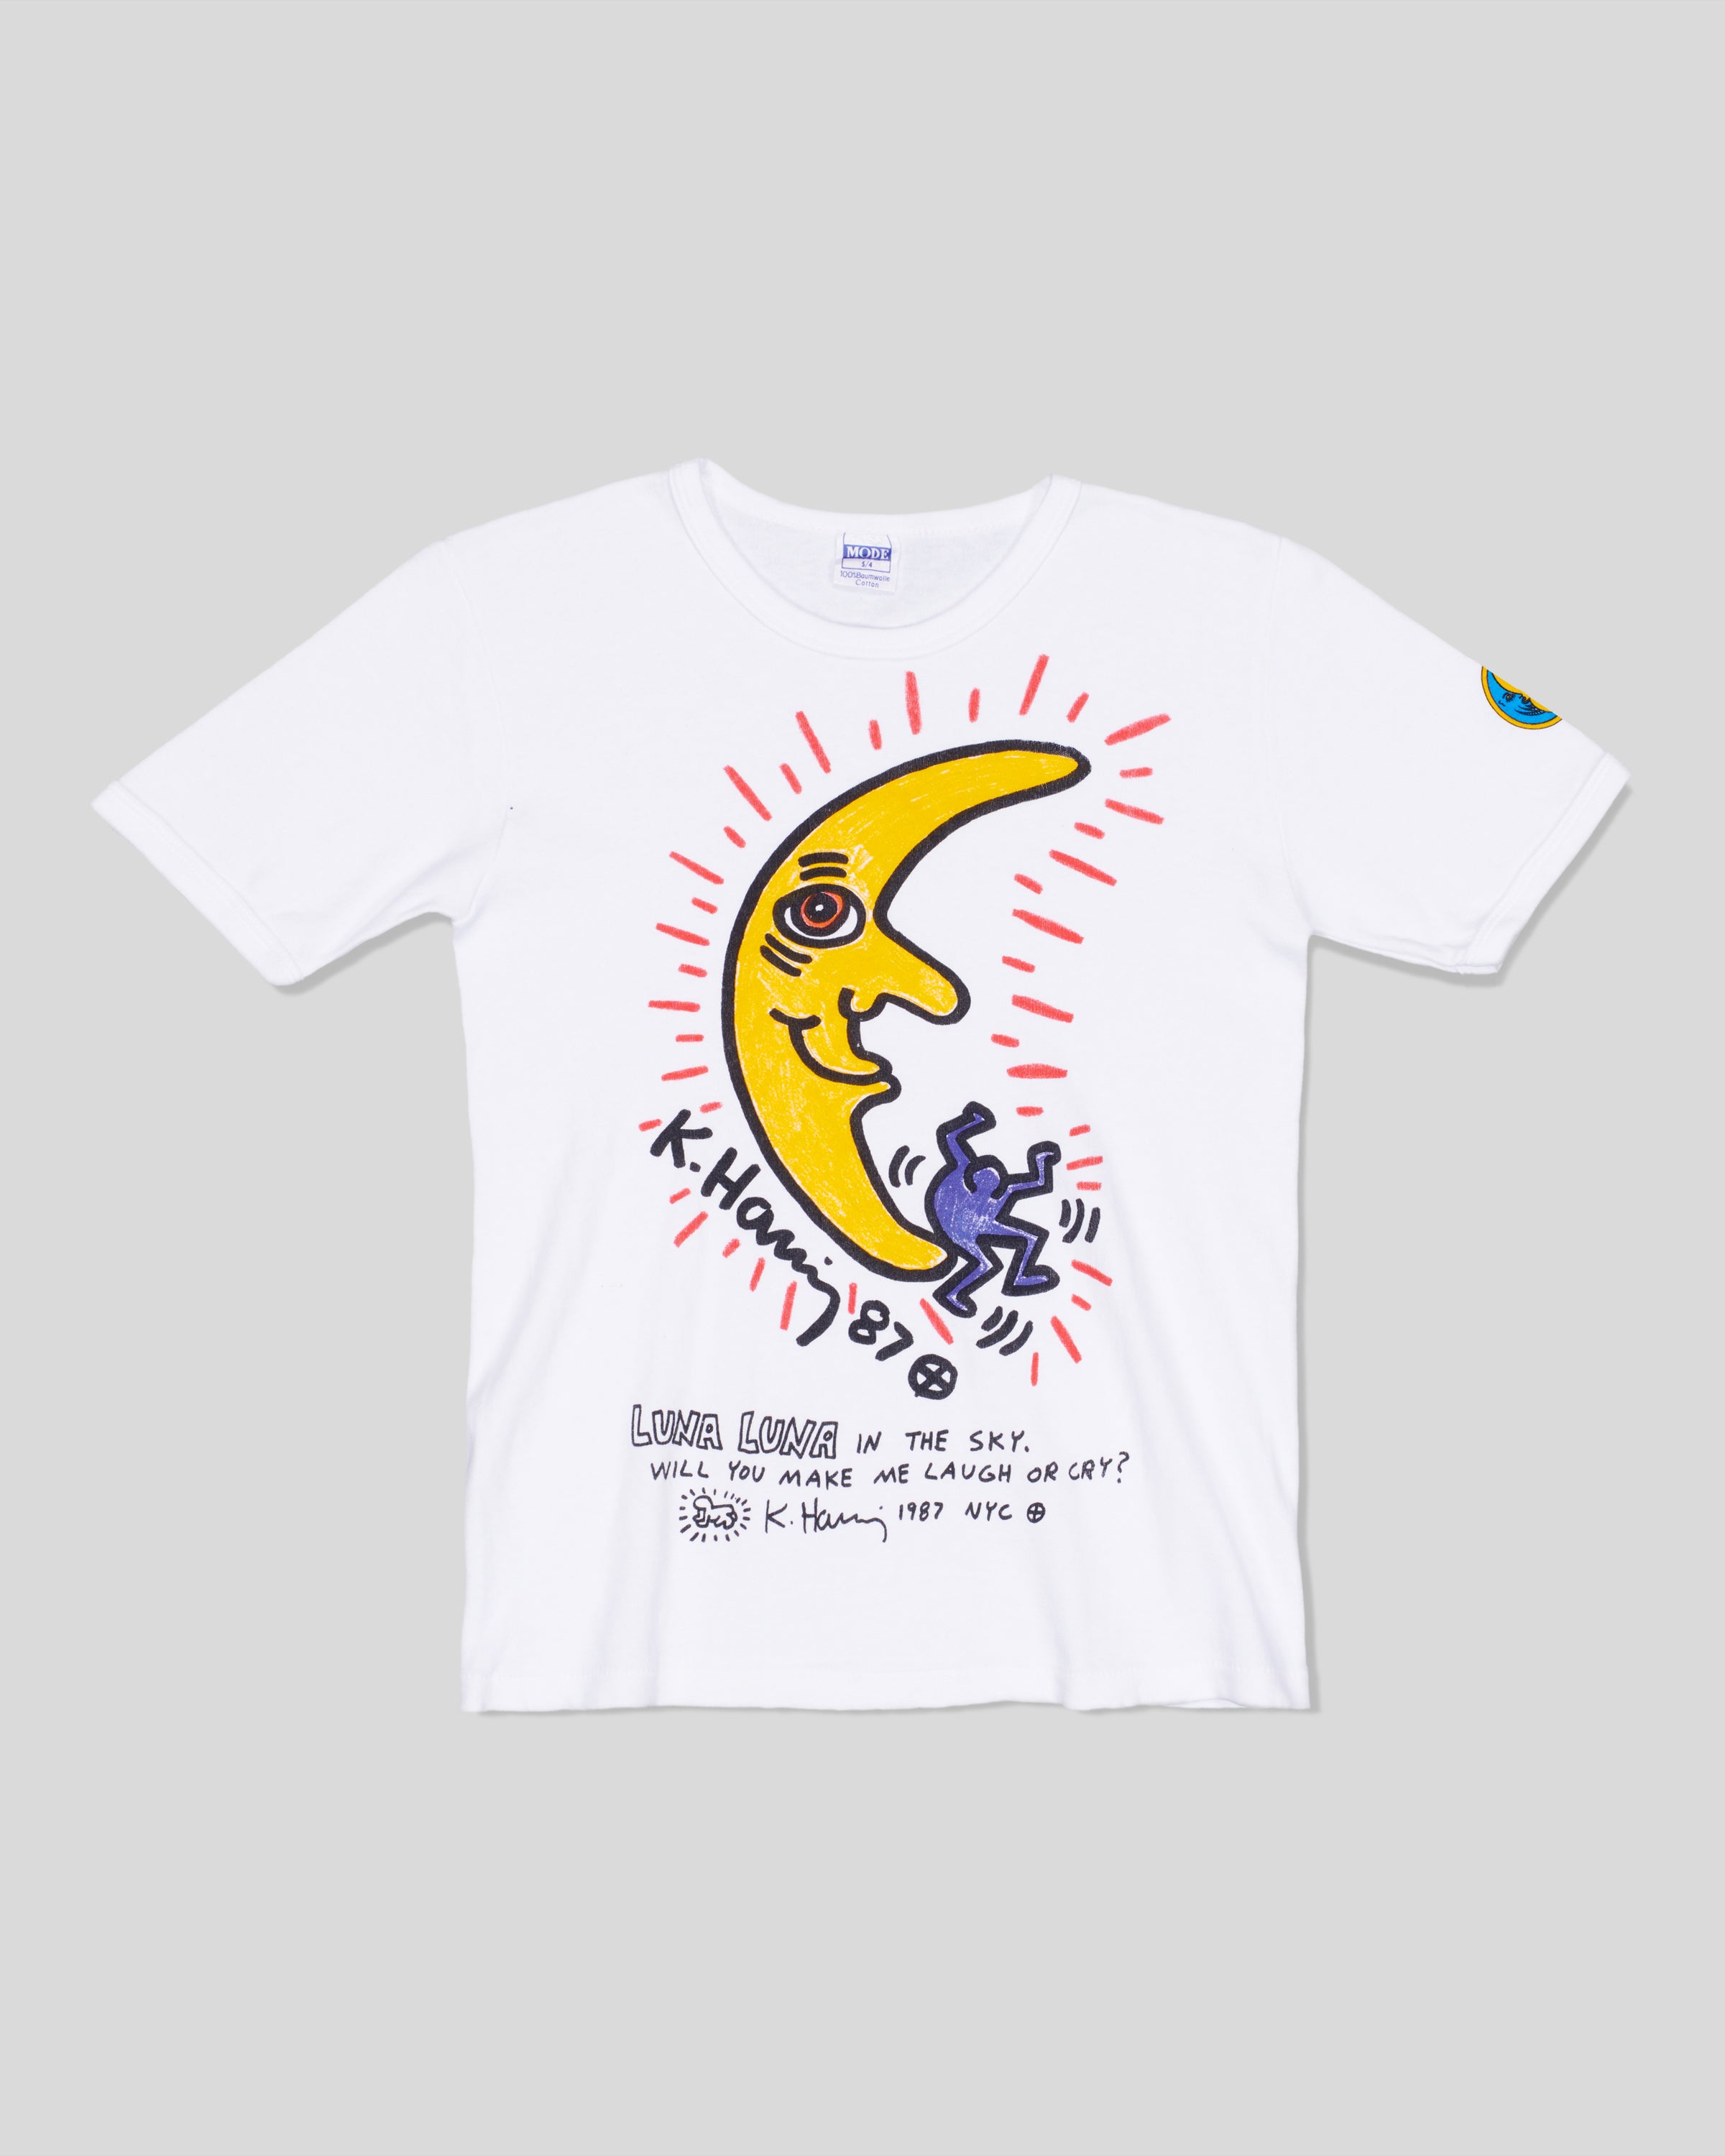 Archival white Fitted Keith Haring T-Shirt